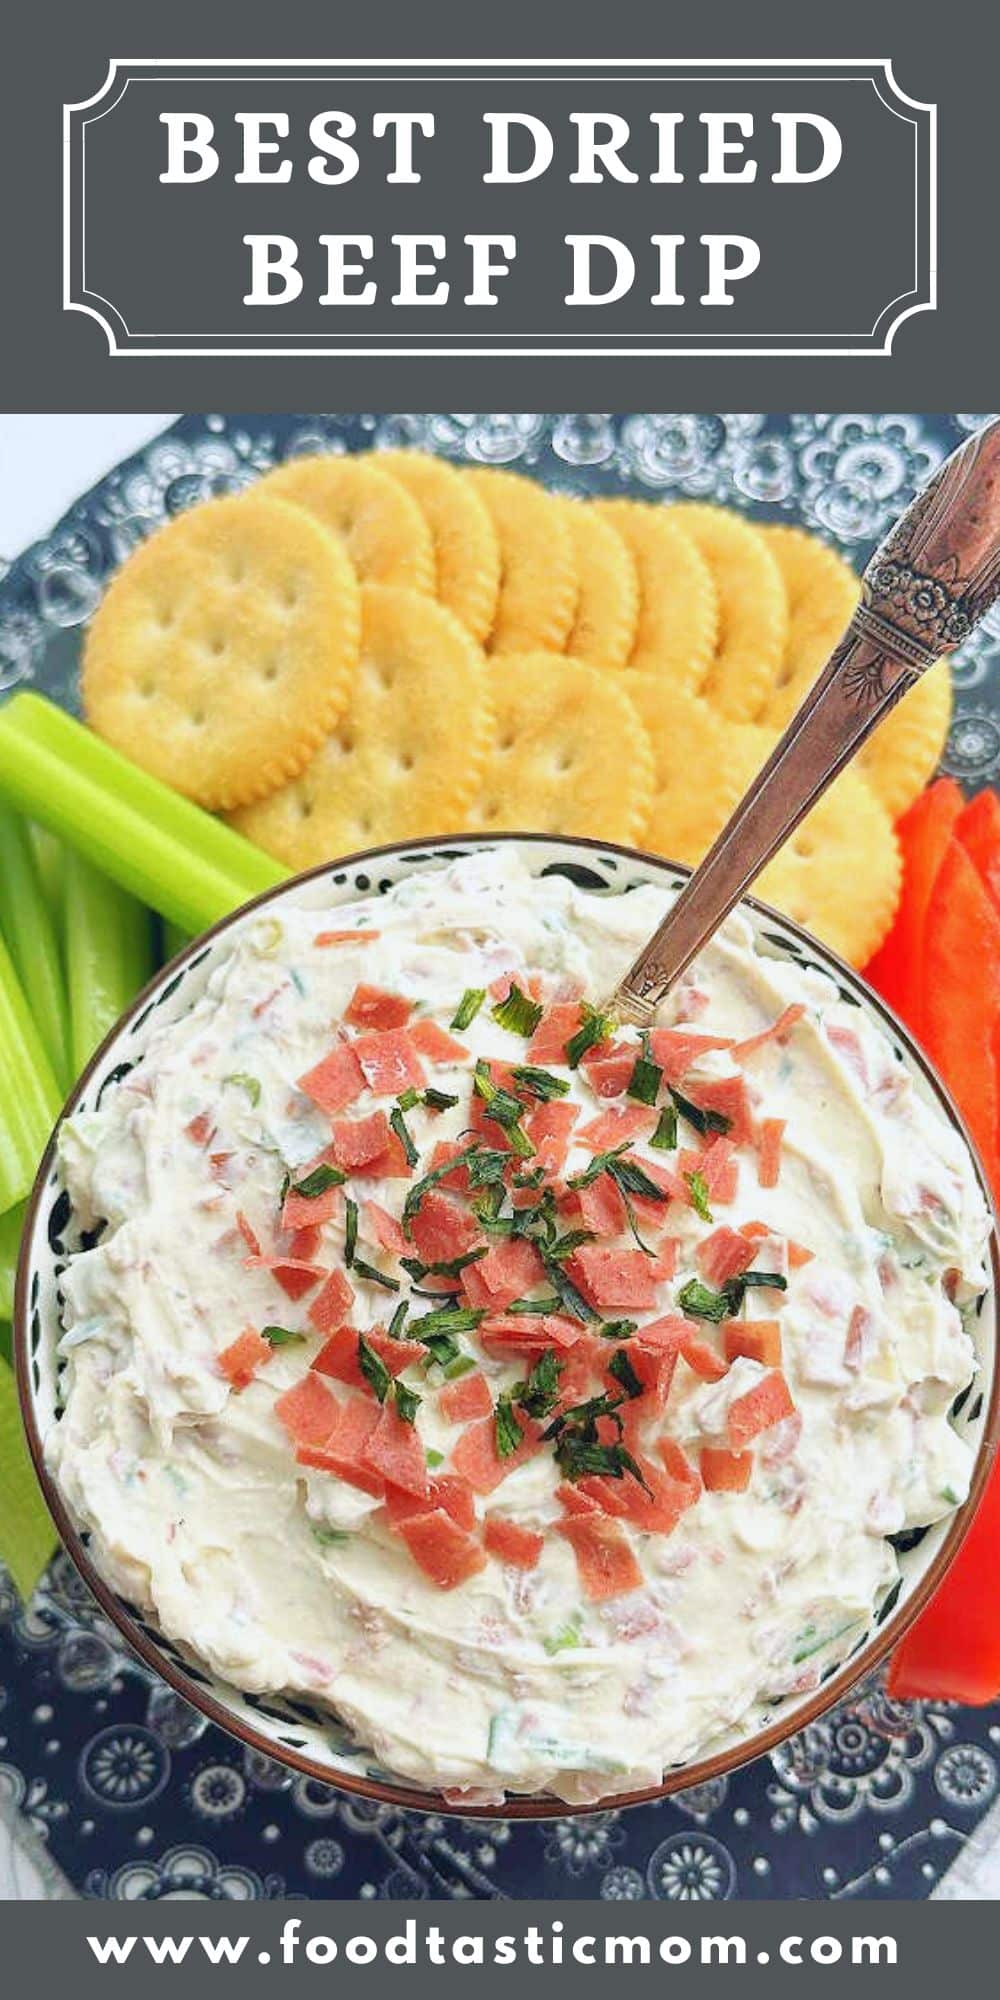 Dried Beef Dip is a classic appetizer made with simple ingredients. Serve this old-school recipe with butter cracker dippers or fresh veggies. via @foodtasticmom